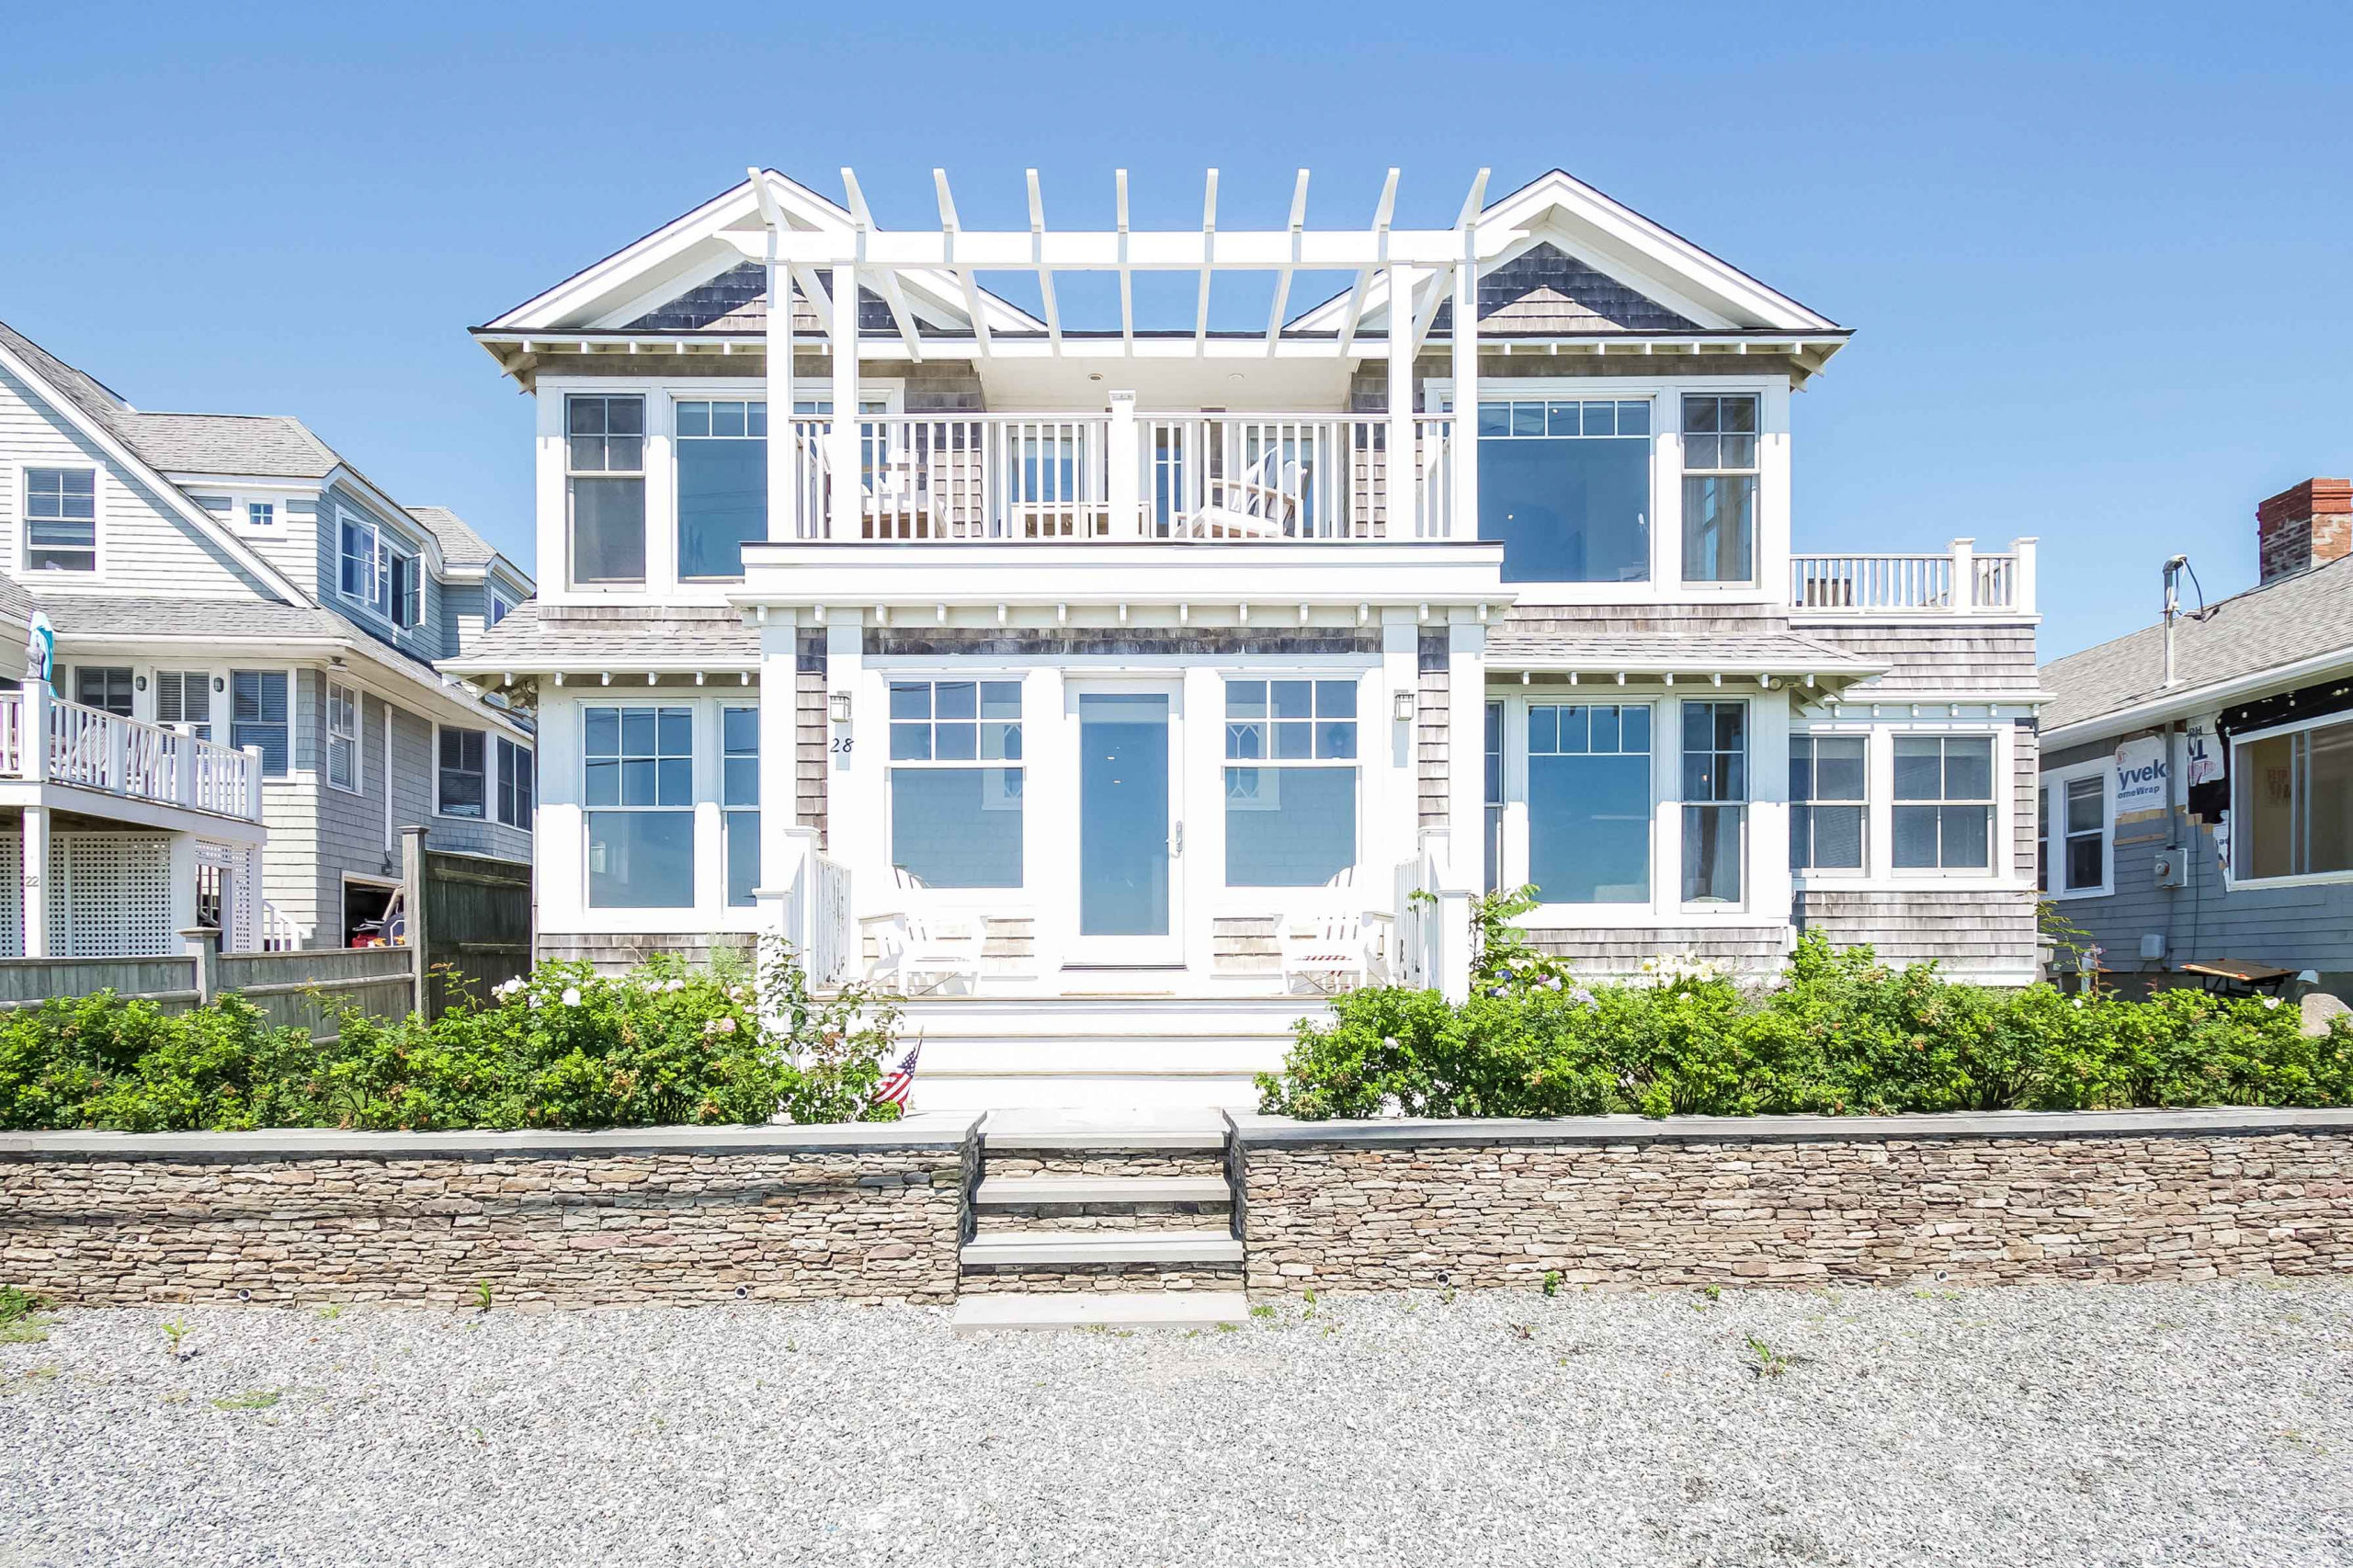 OCEANFRONT HOME ON ESPLANADE BOULEVARD TRADES FOR $2,350,000 WITH LILA DELMAN ASSOCIATES REPRESENTING BOTH THE SELLER AND THE BUYER